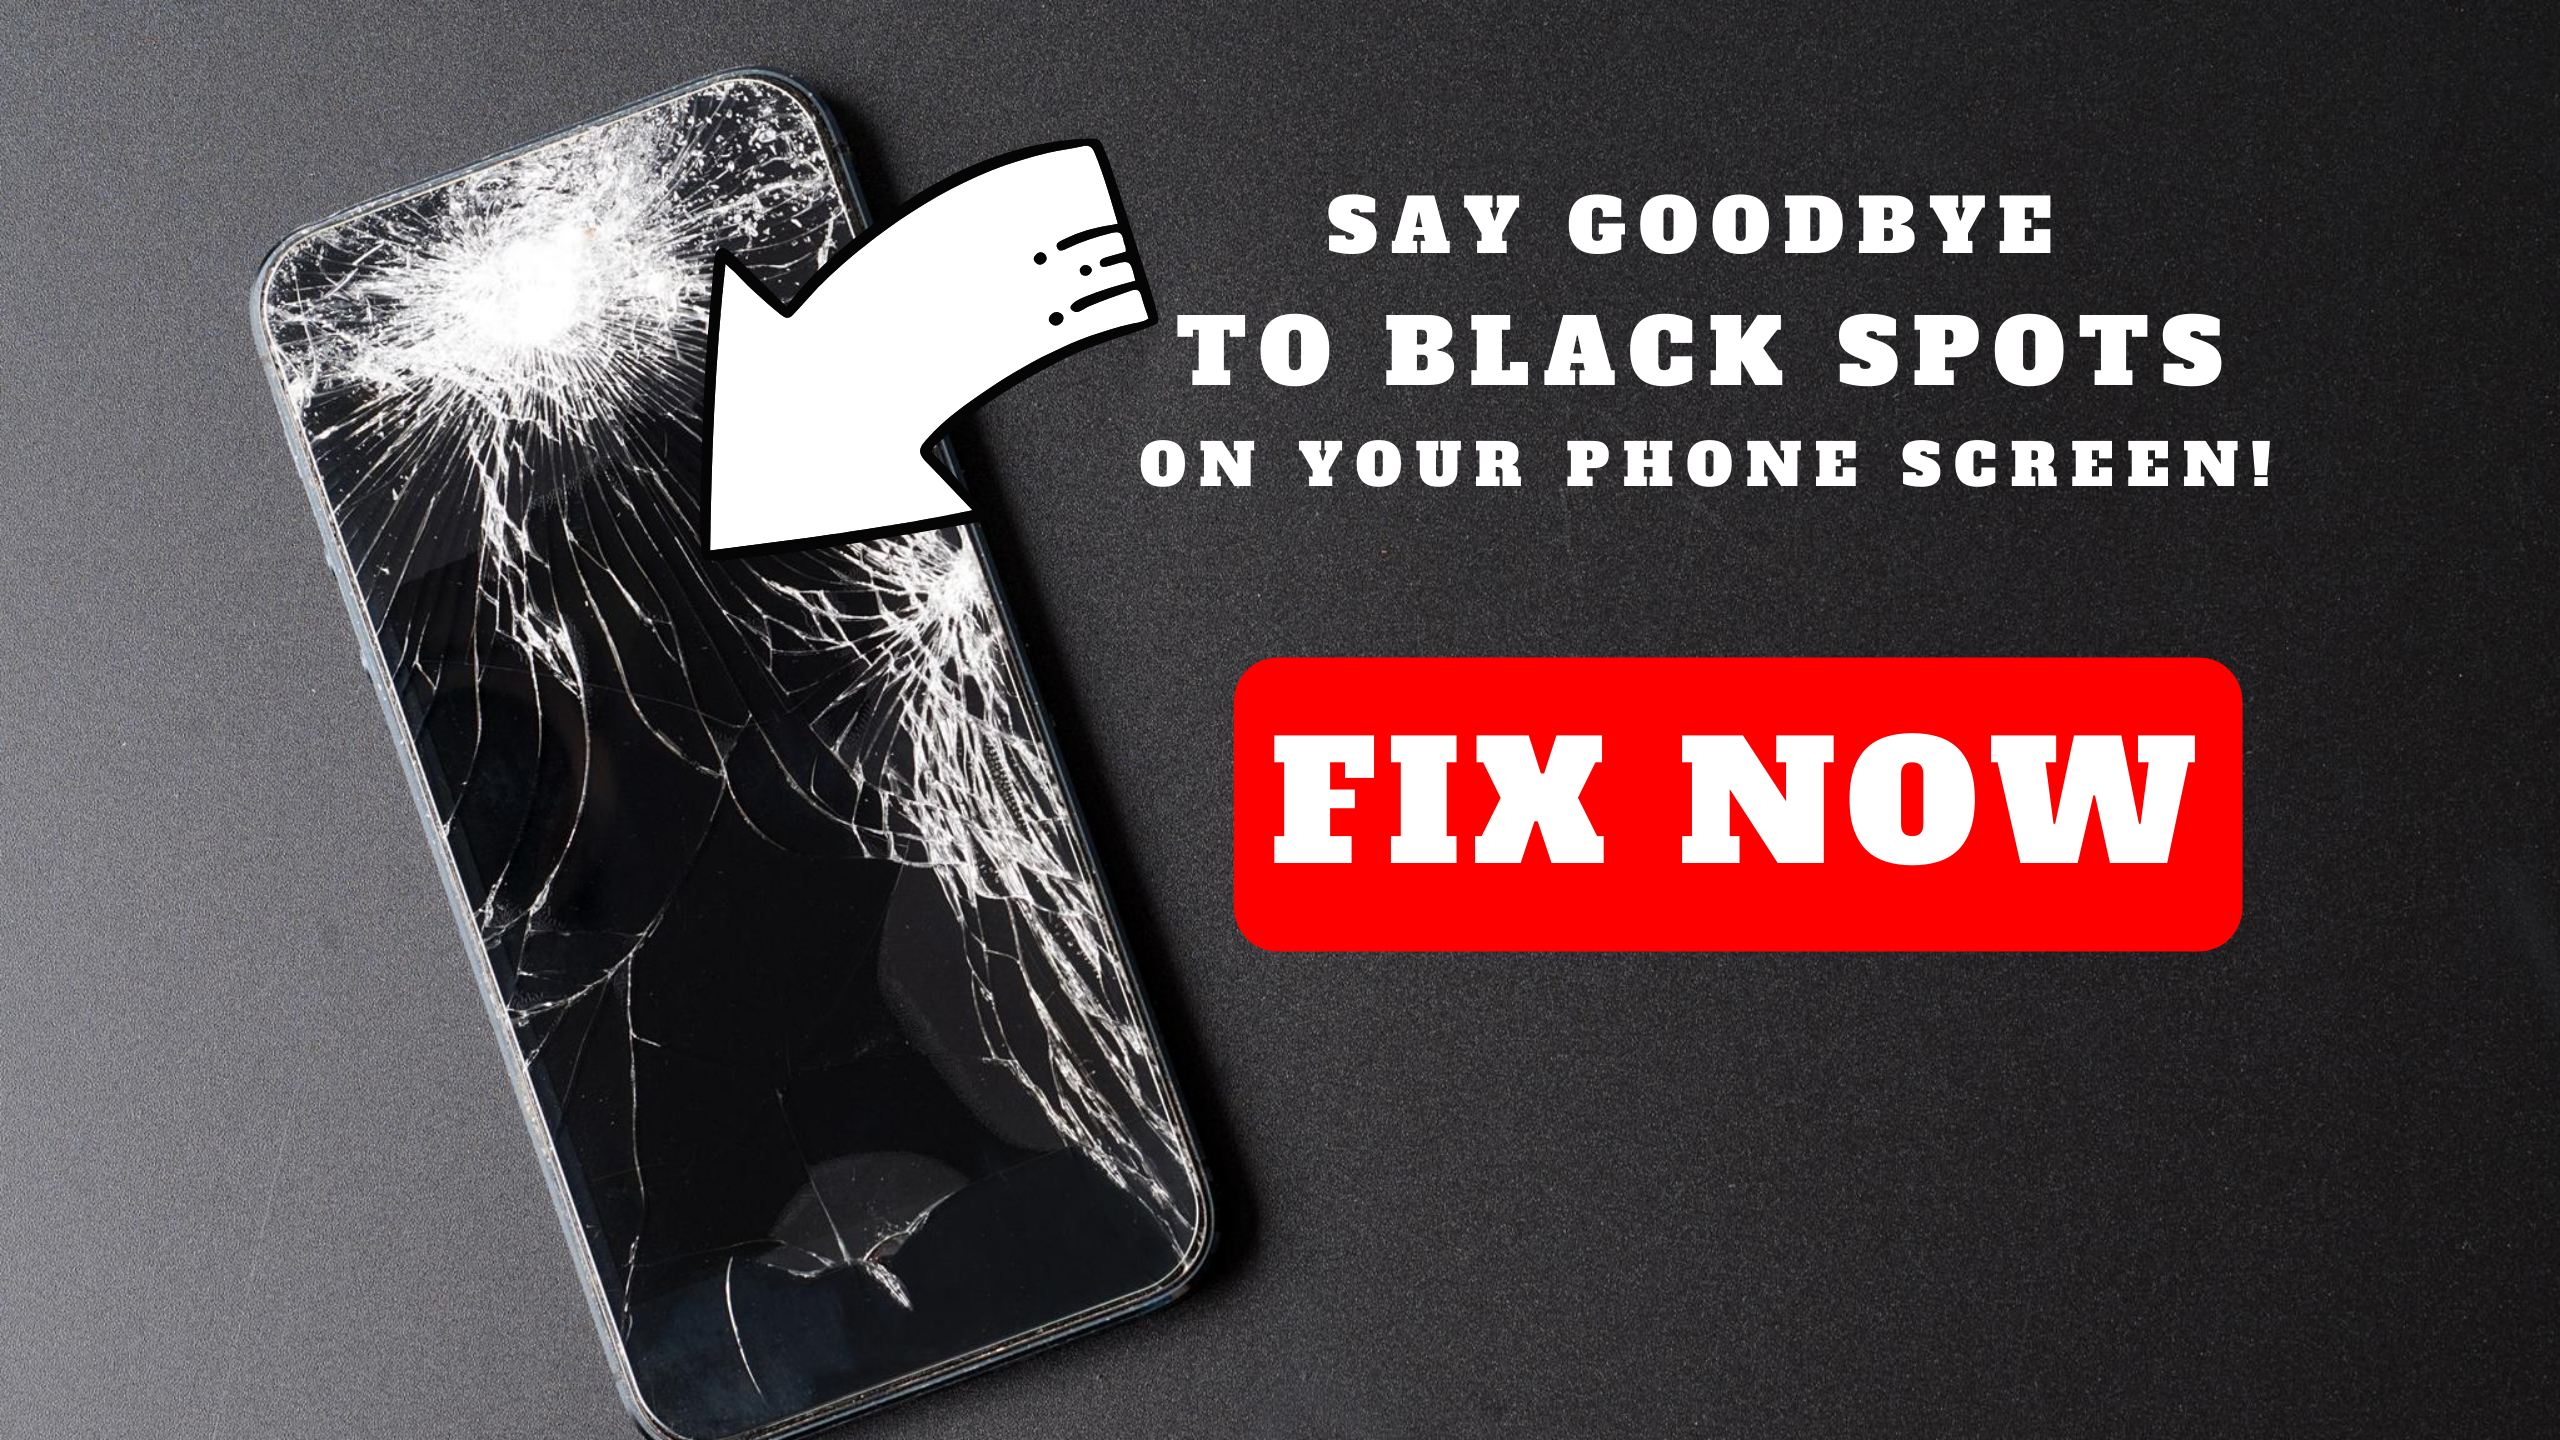 How To Fix Black Spots on Phone Screen?